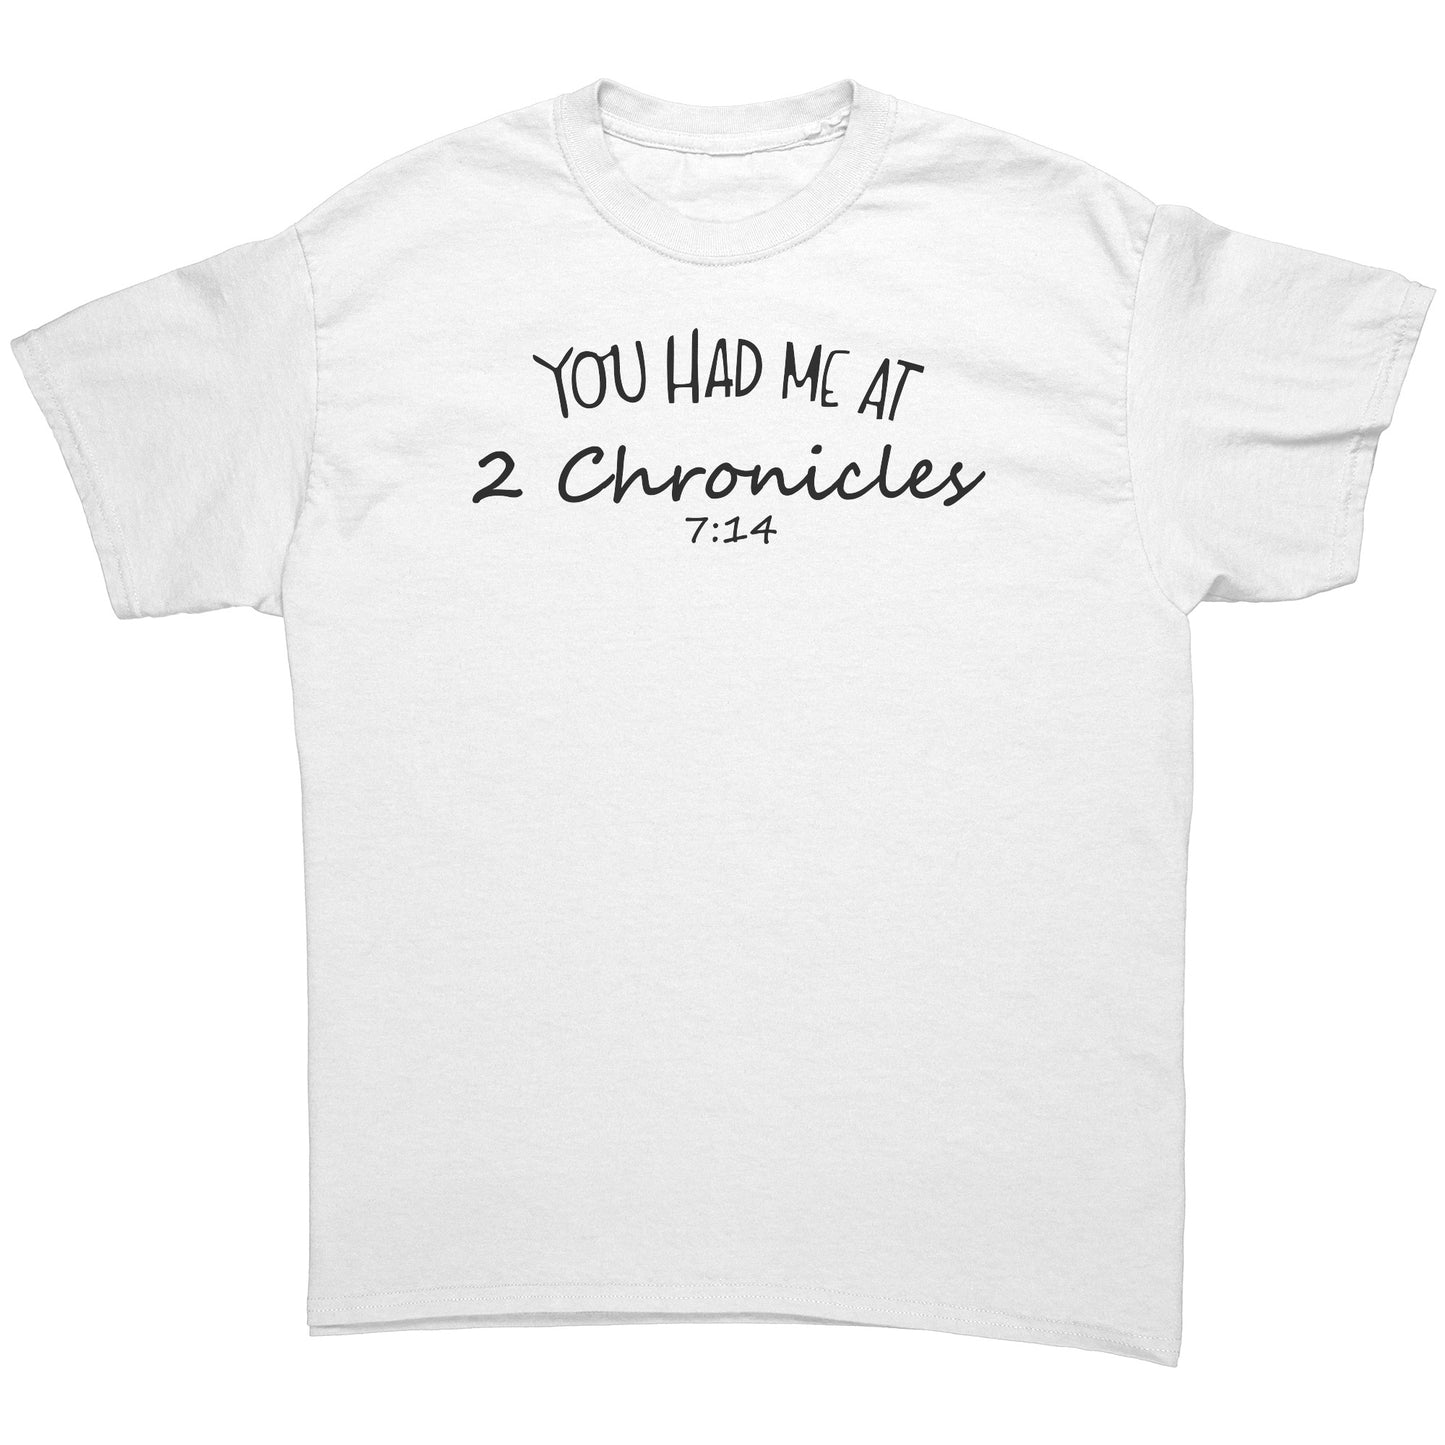 You Had Me At 2 Chronicles 7:14 Men's T-Shirt Part 1